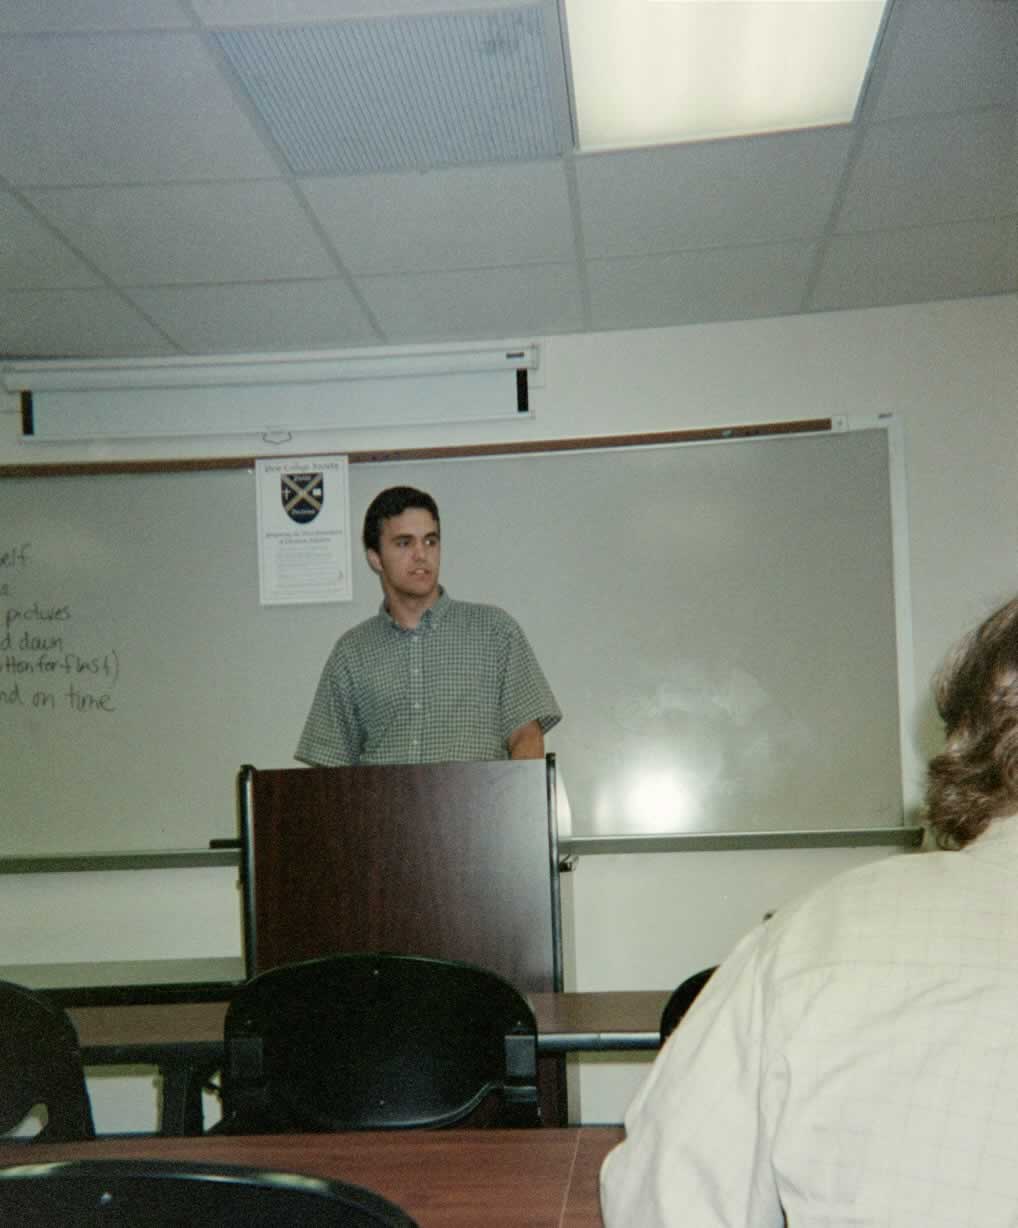 picture of a man in a checkered shirt standing behind a podium speaking